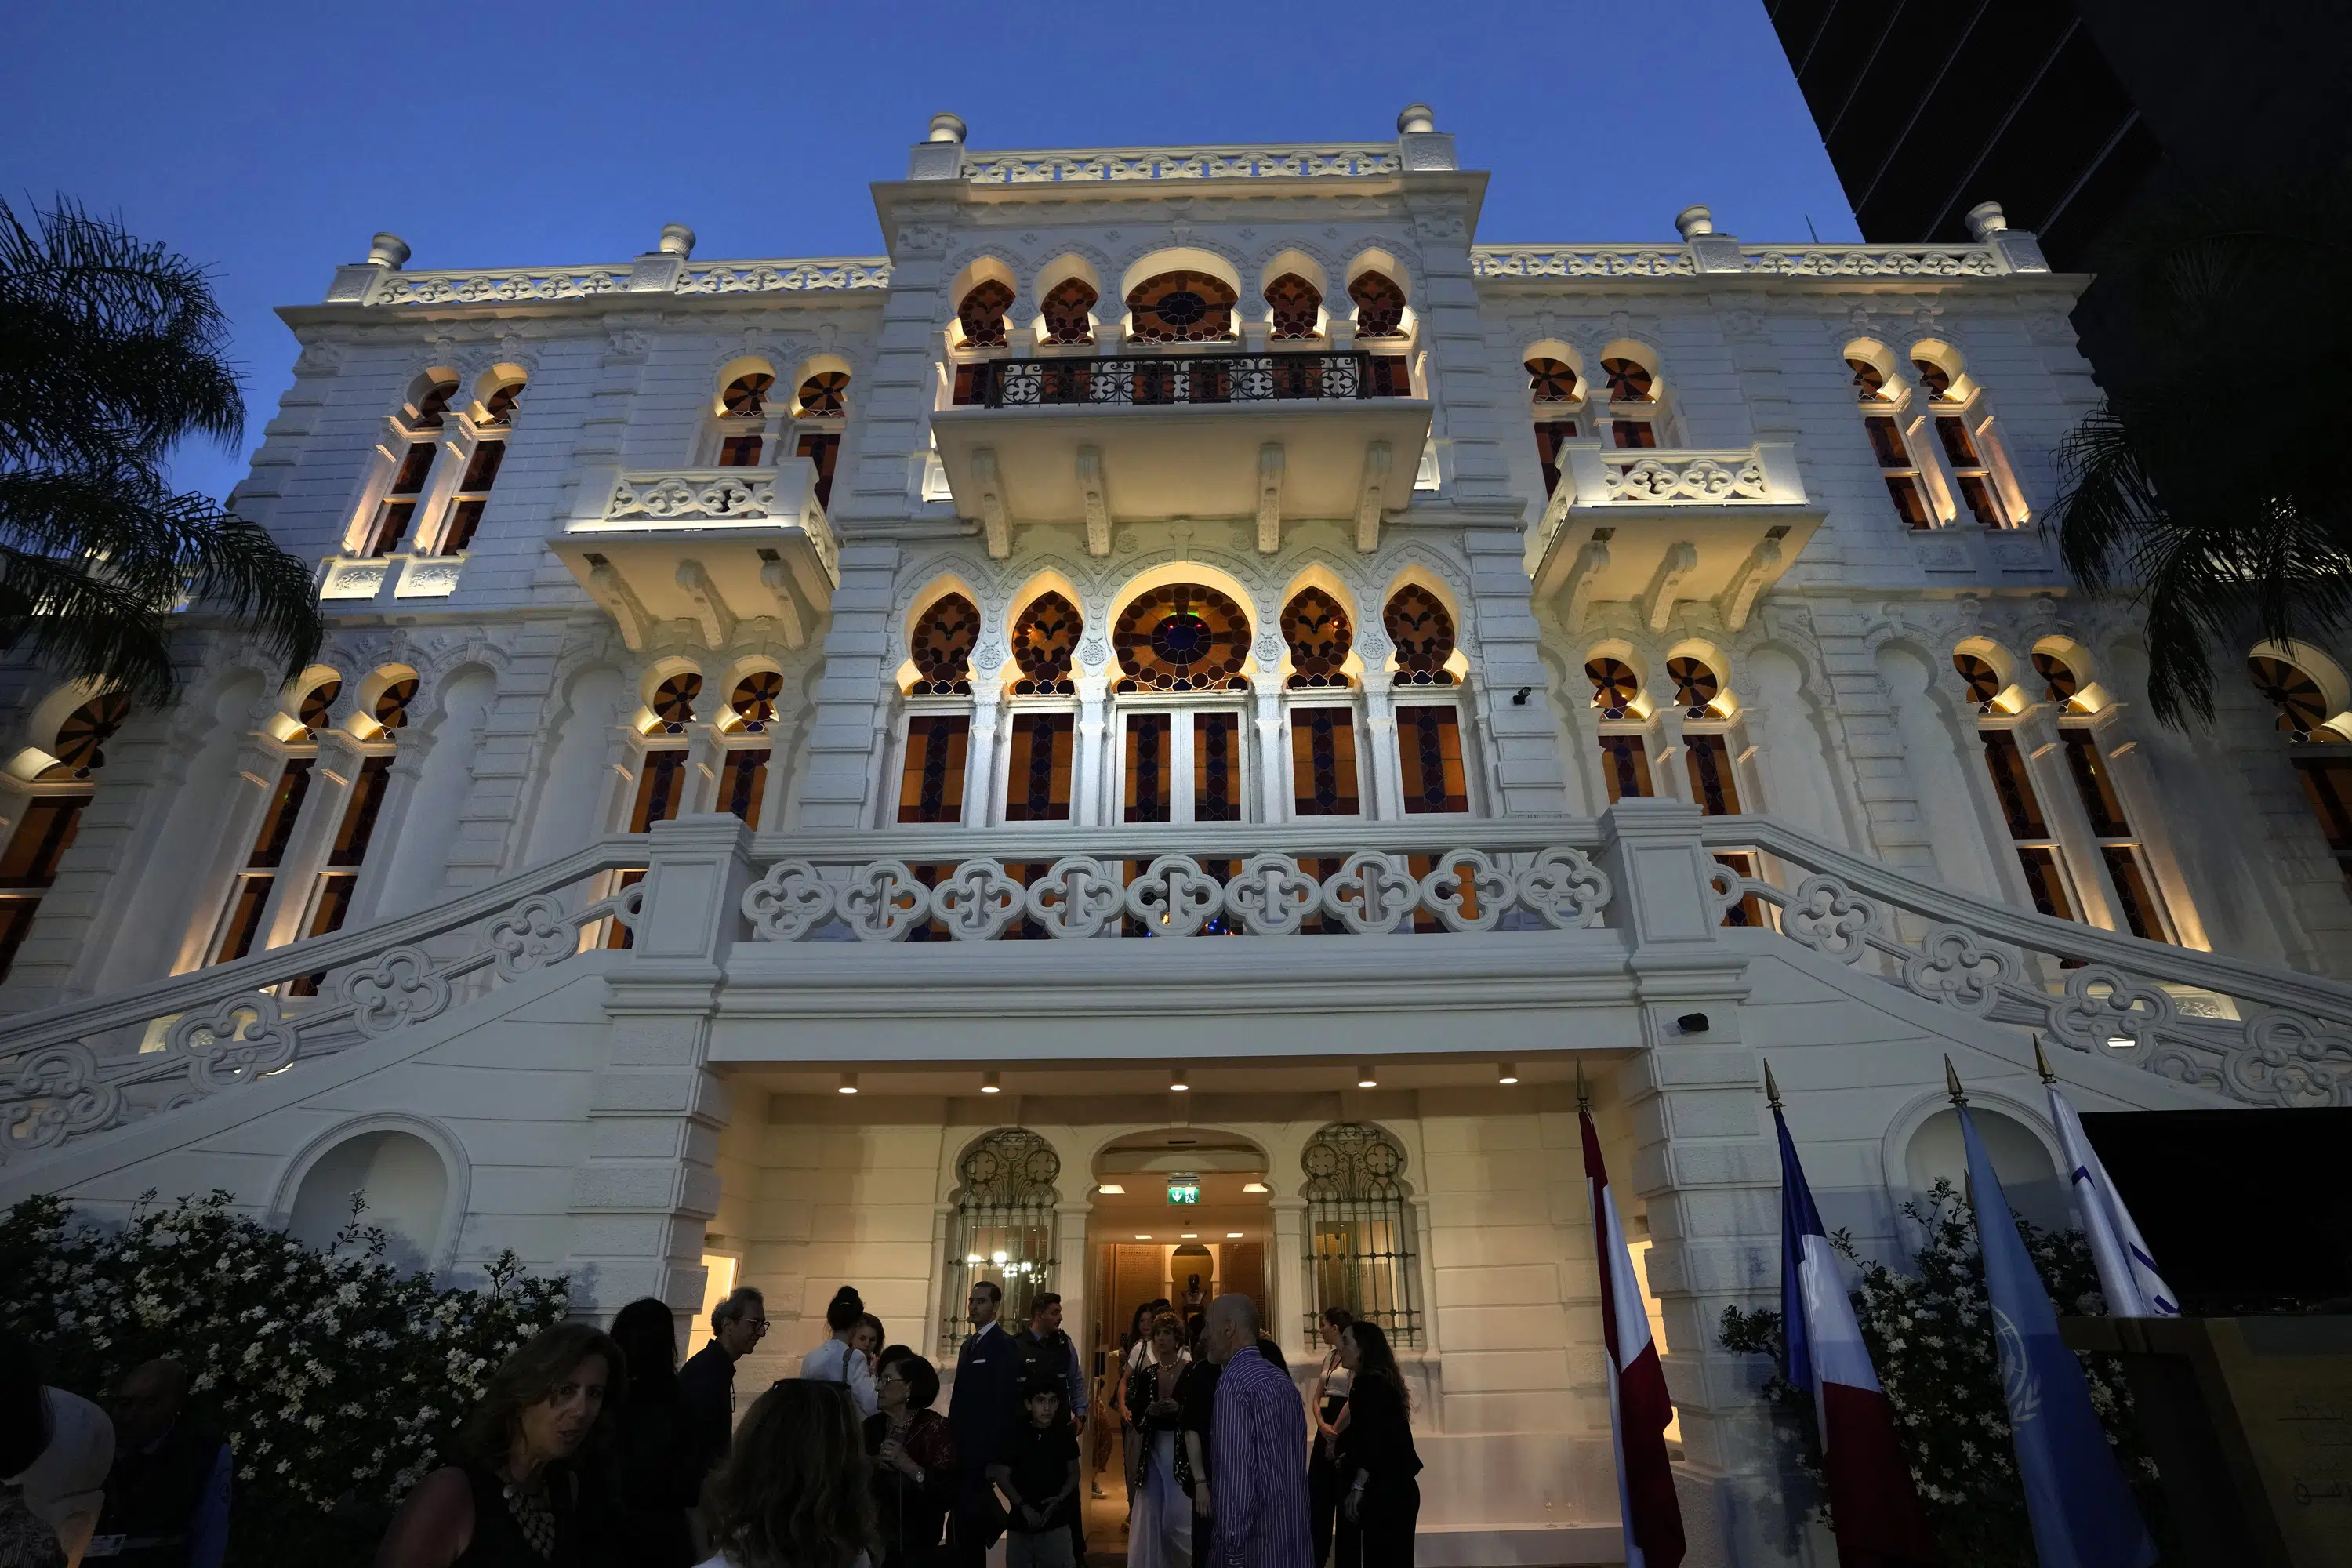 From ashes and debris, iconic Beirut museum reopens 3 years after massive damage from port blast